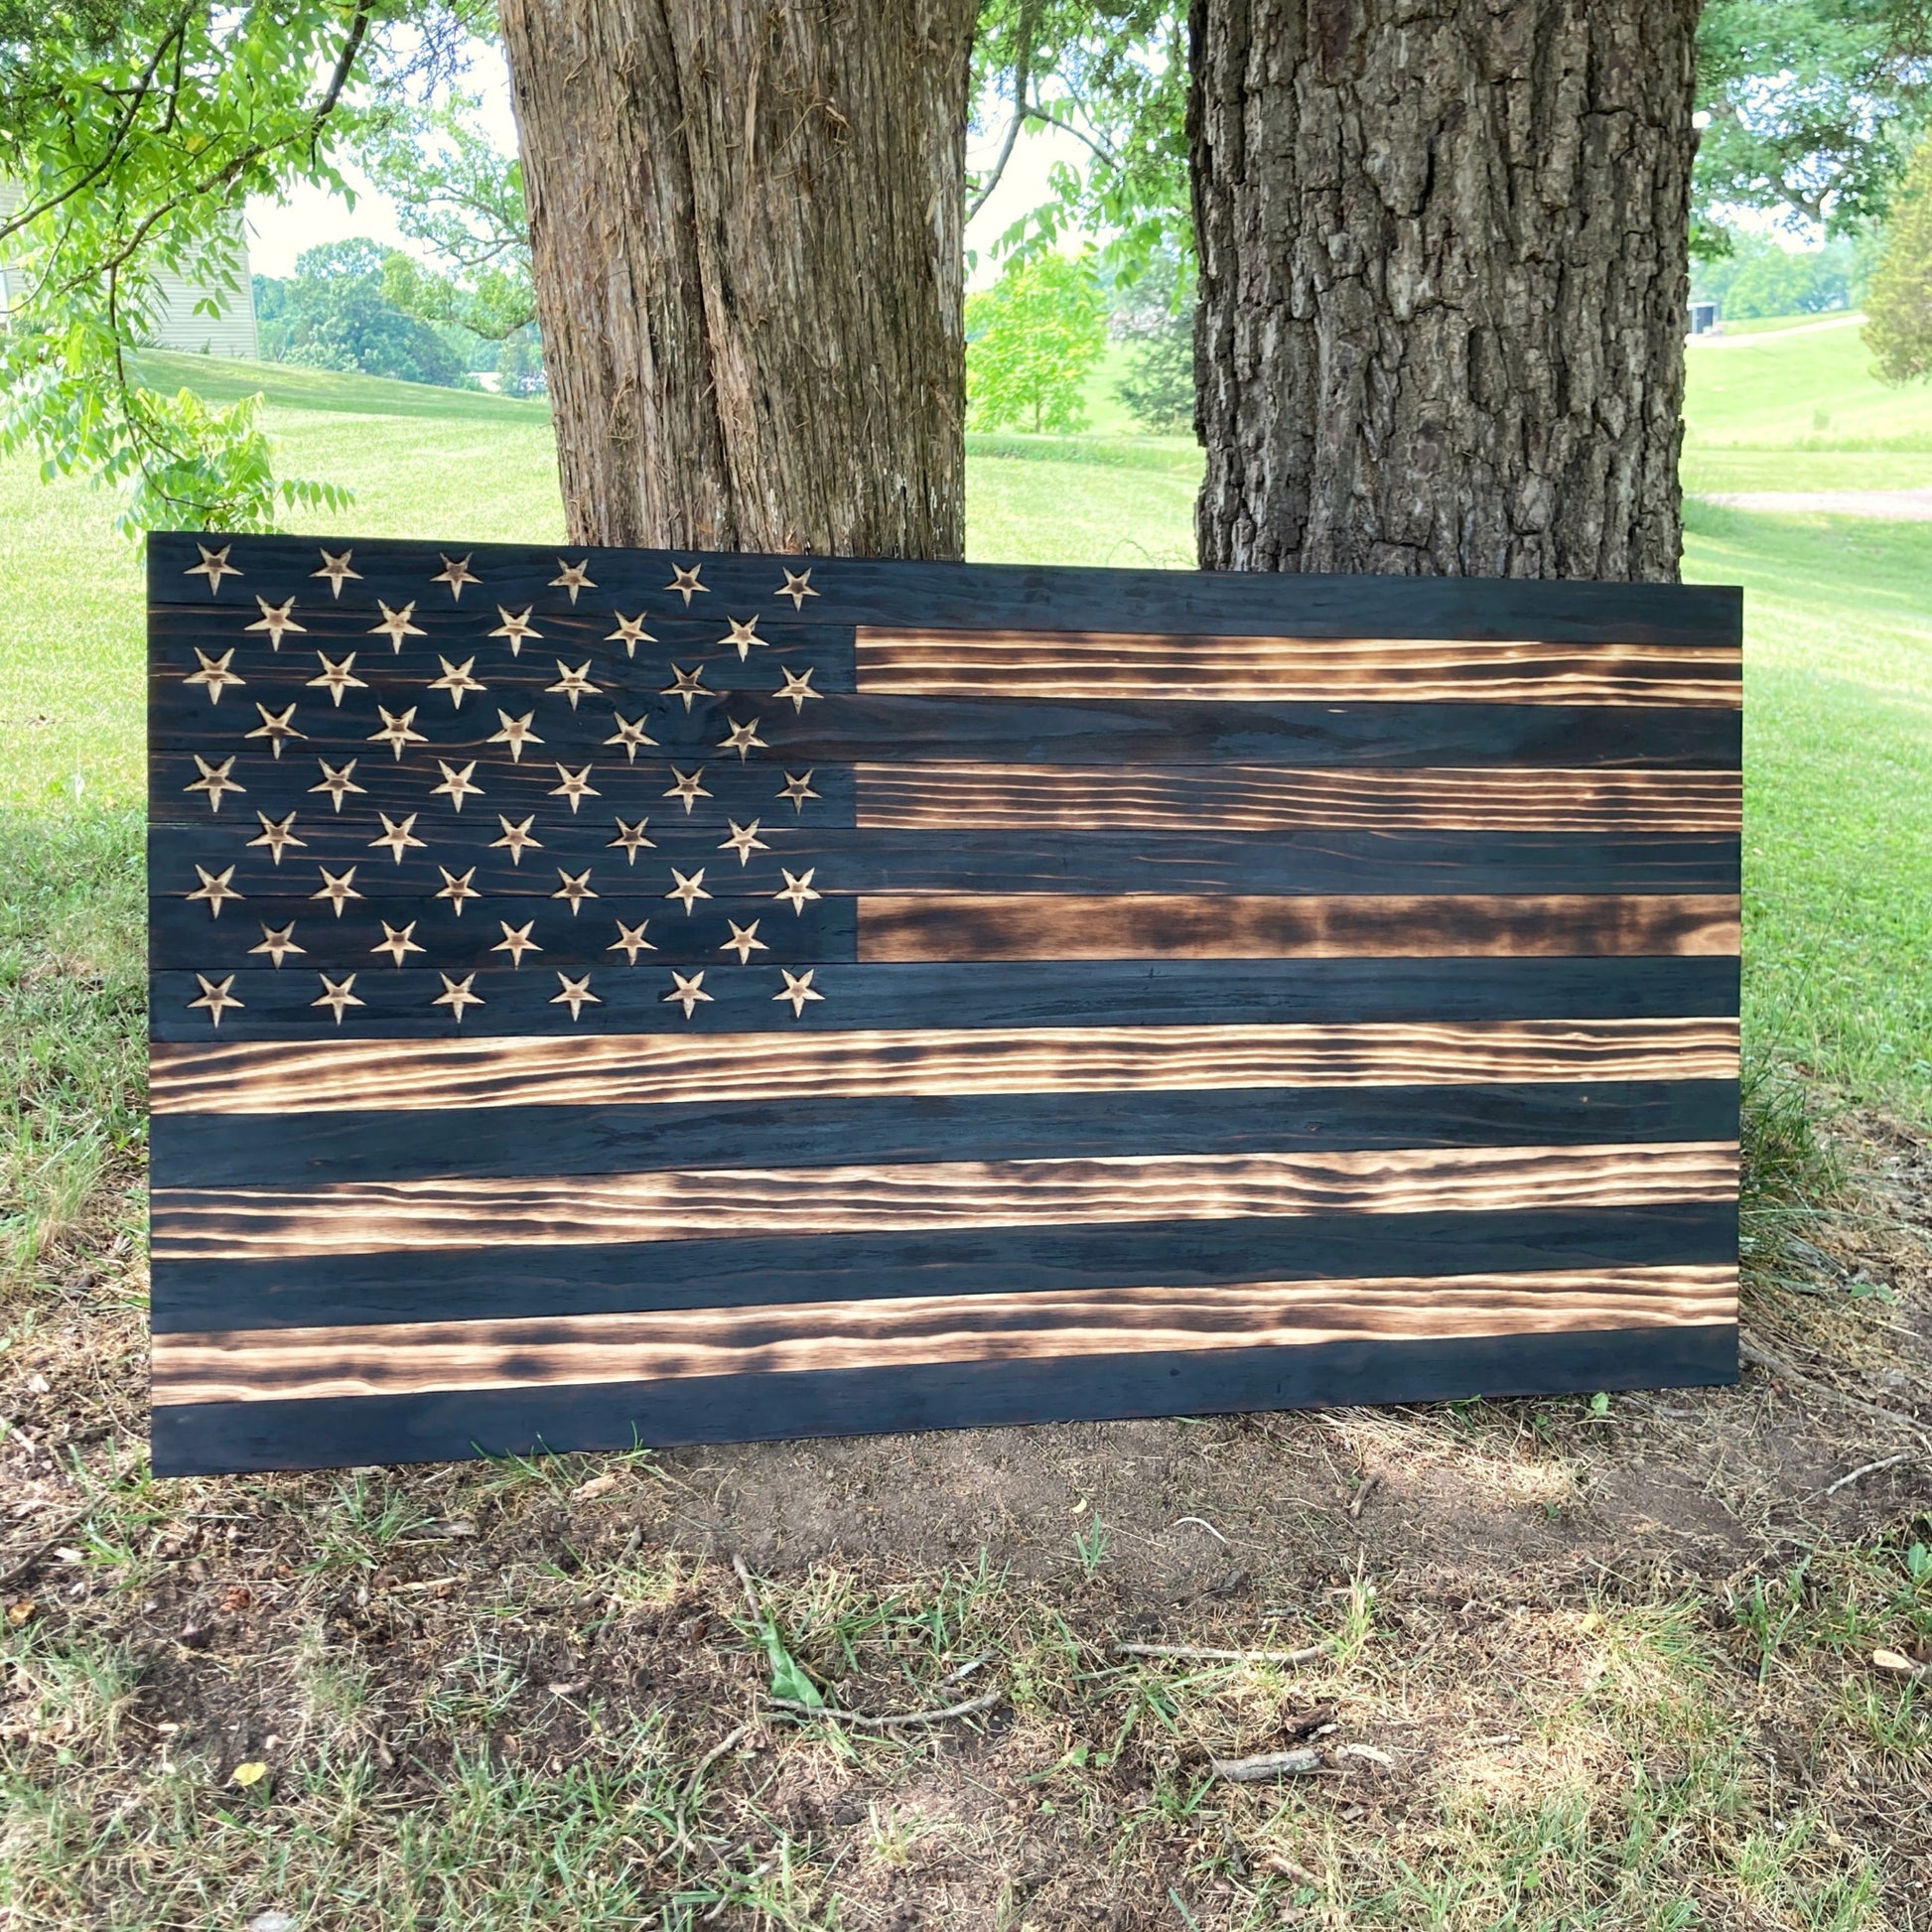 Five foot wide wooden American flag that has been burned to bring out the texture of the wood. No color just natural wood and carved stars in the union